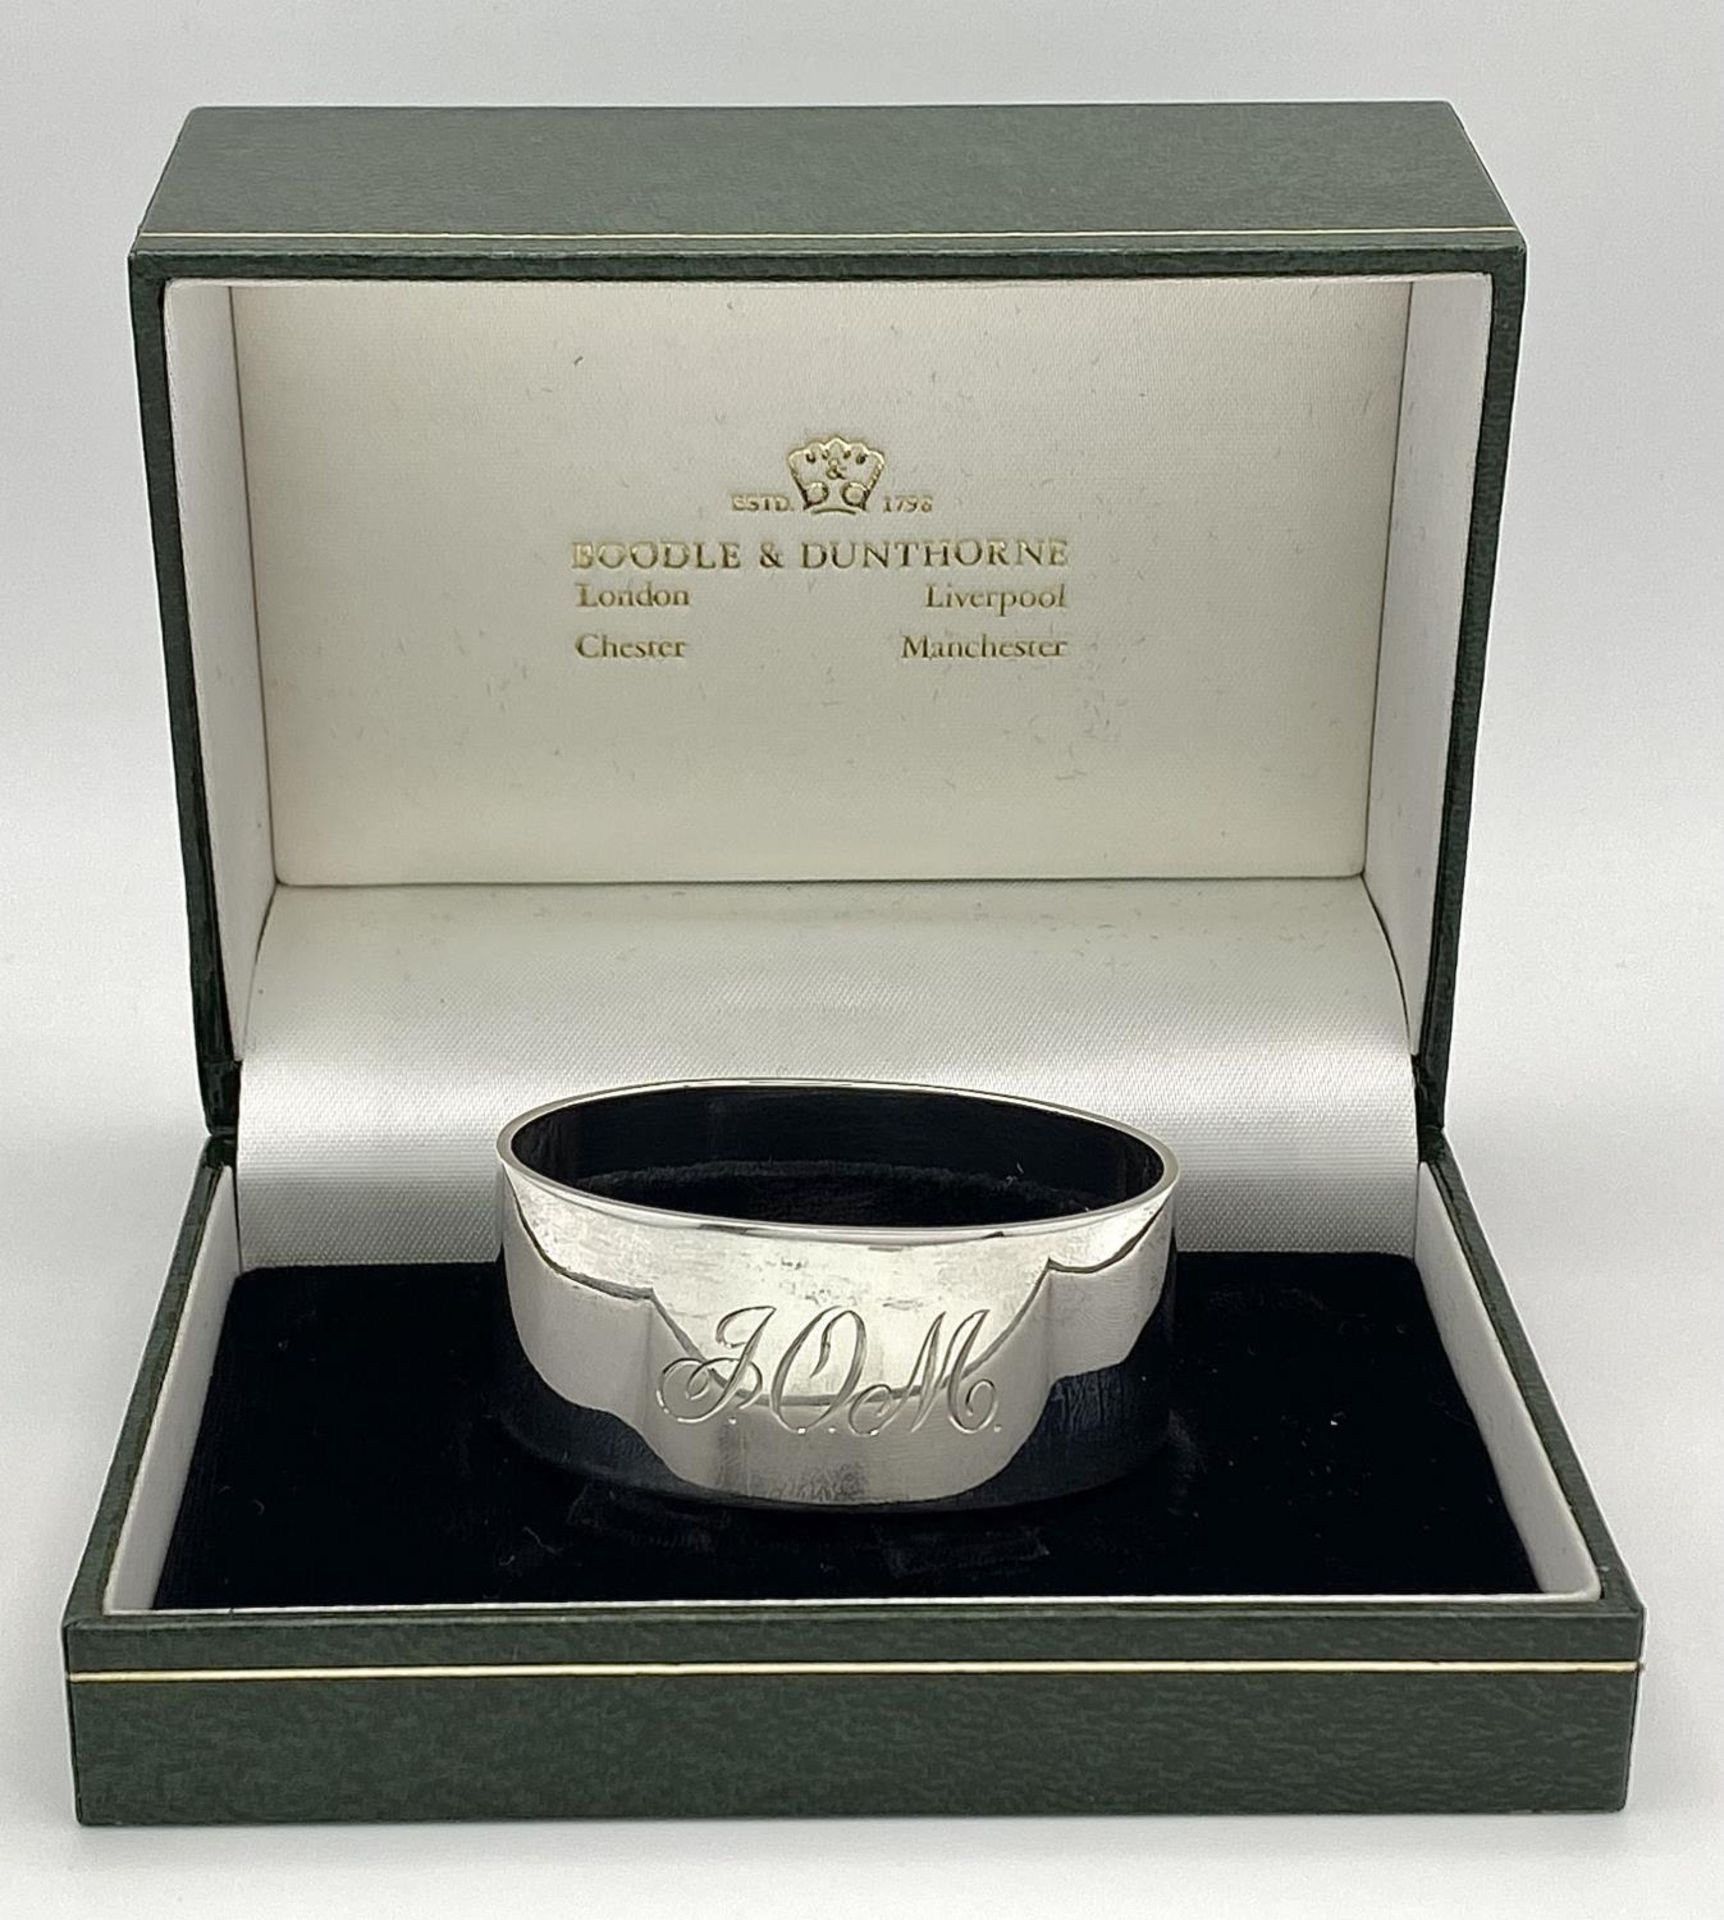 A Sterling Silver Engraved Oval Napkin Ring from Boodles and Dunthorne, in original box, Christening